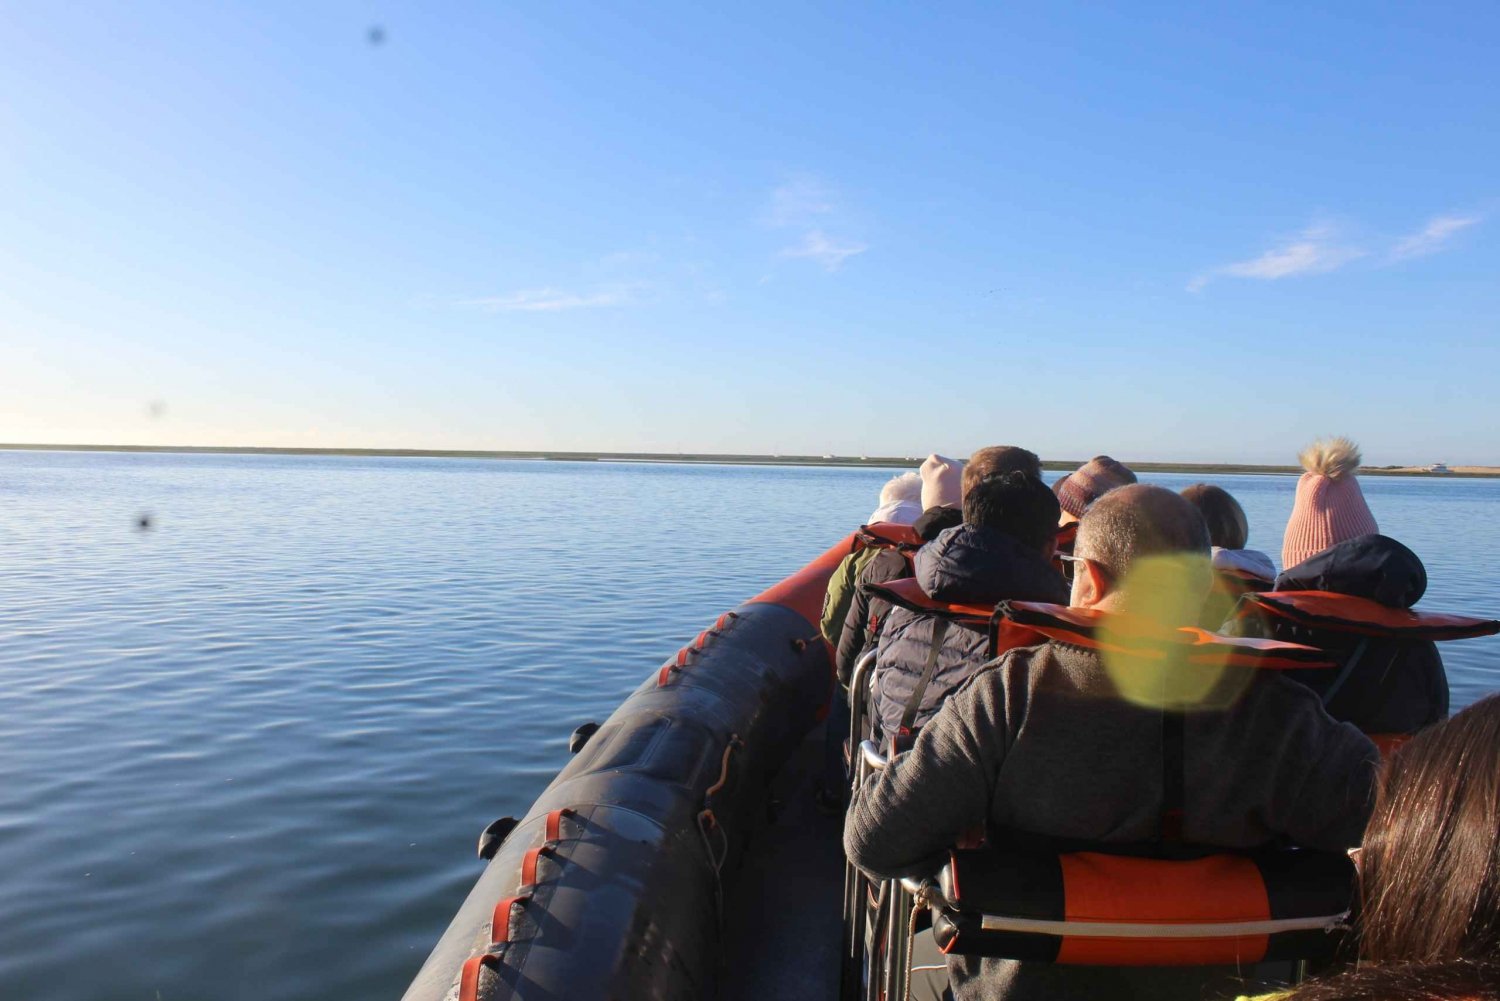 From Faro: Dolphin Watching & 2 Islands Tour